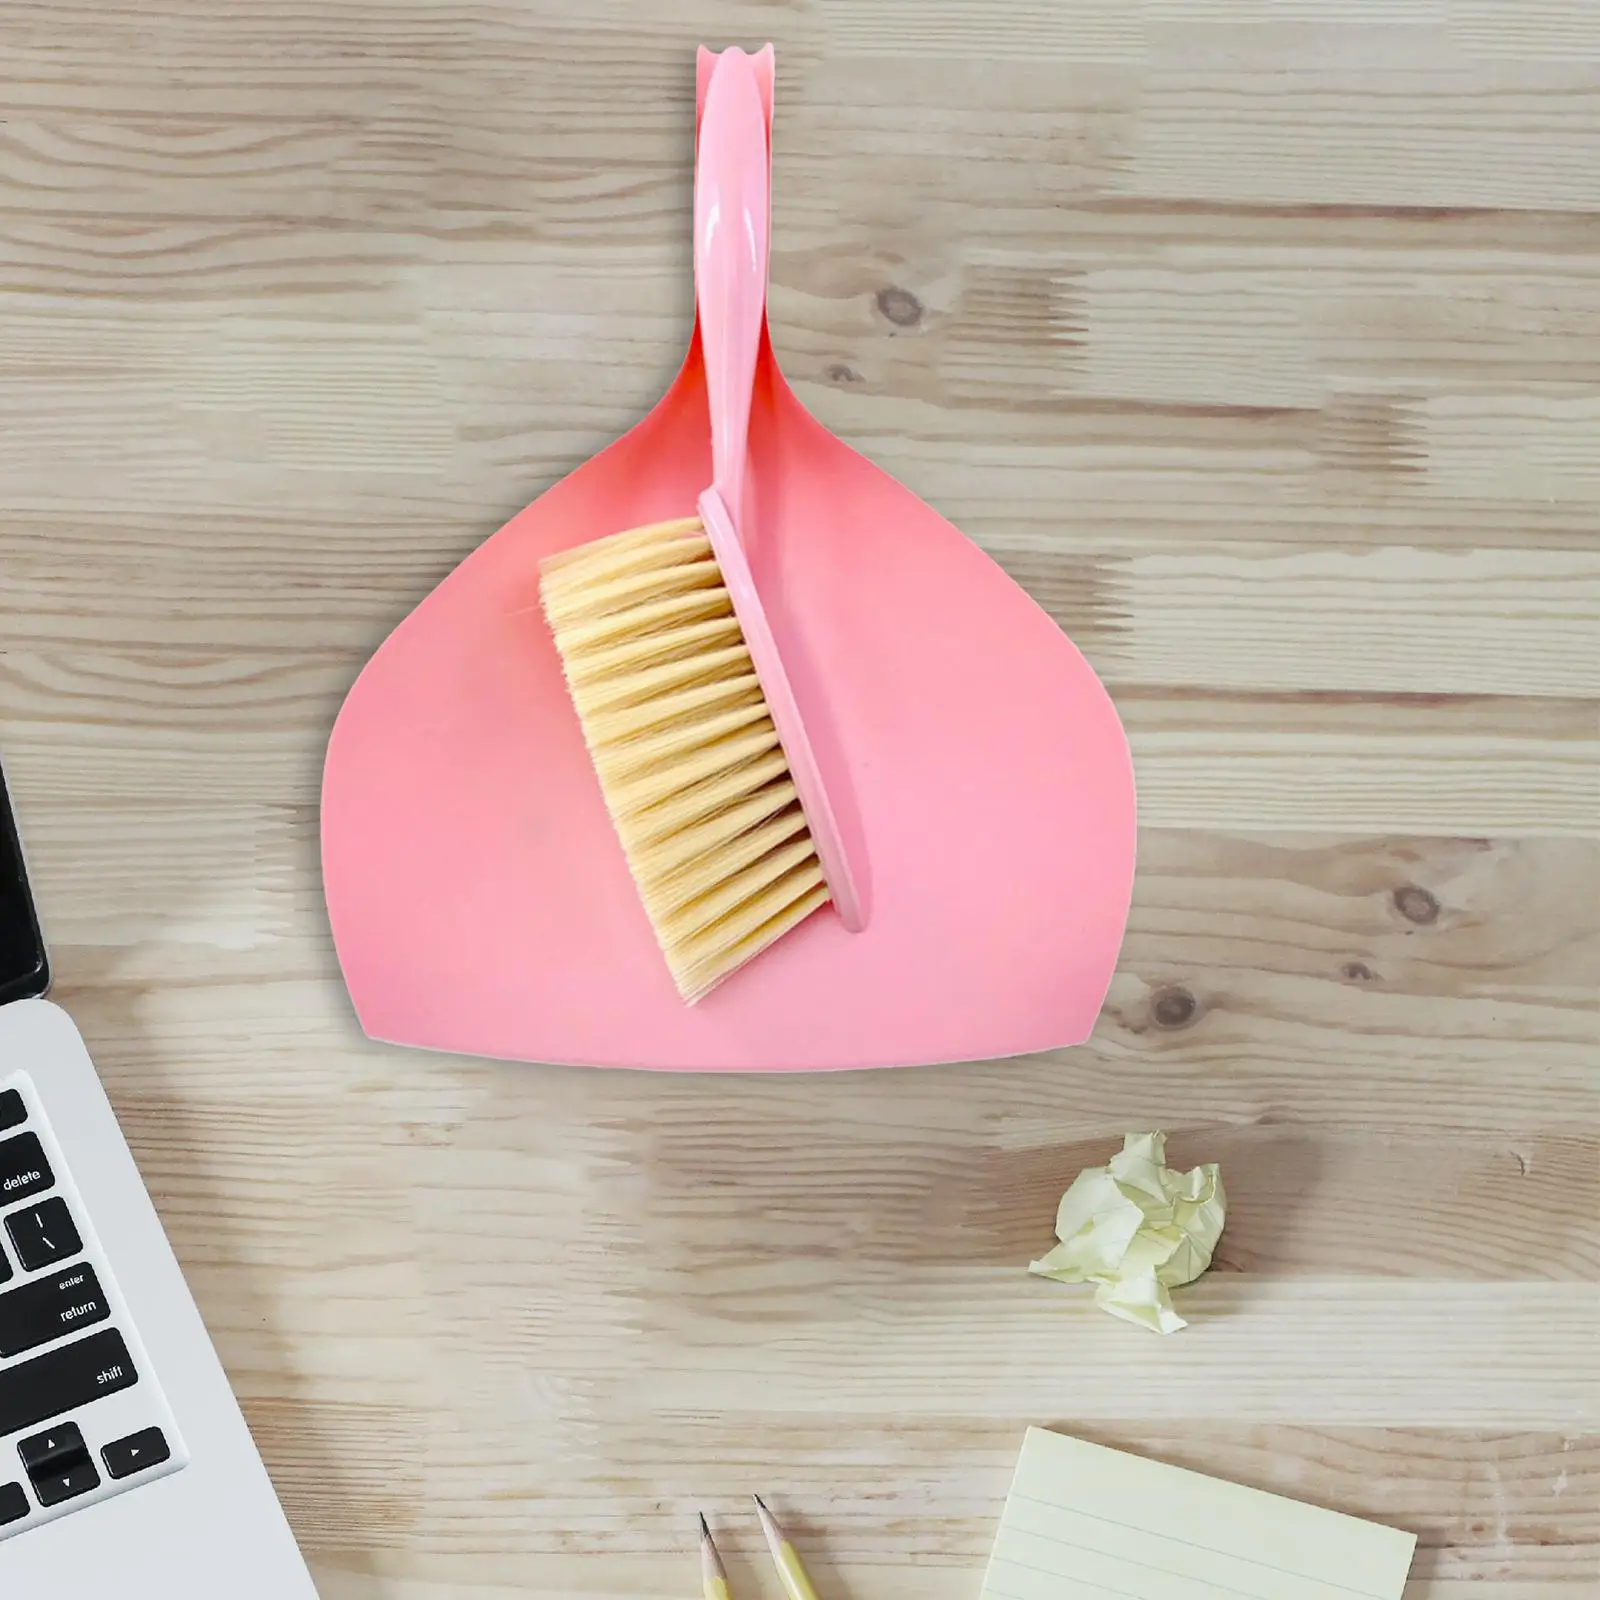 Mini Cleaning Broom Brush Set Durable Portable Small Broom Dustpan Set Cleaning Brush for Counter Table Kitchen Desktop Keyboard